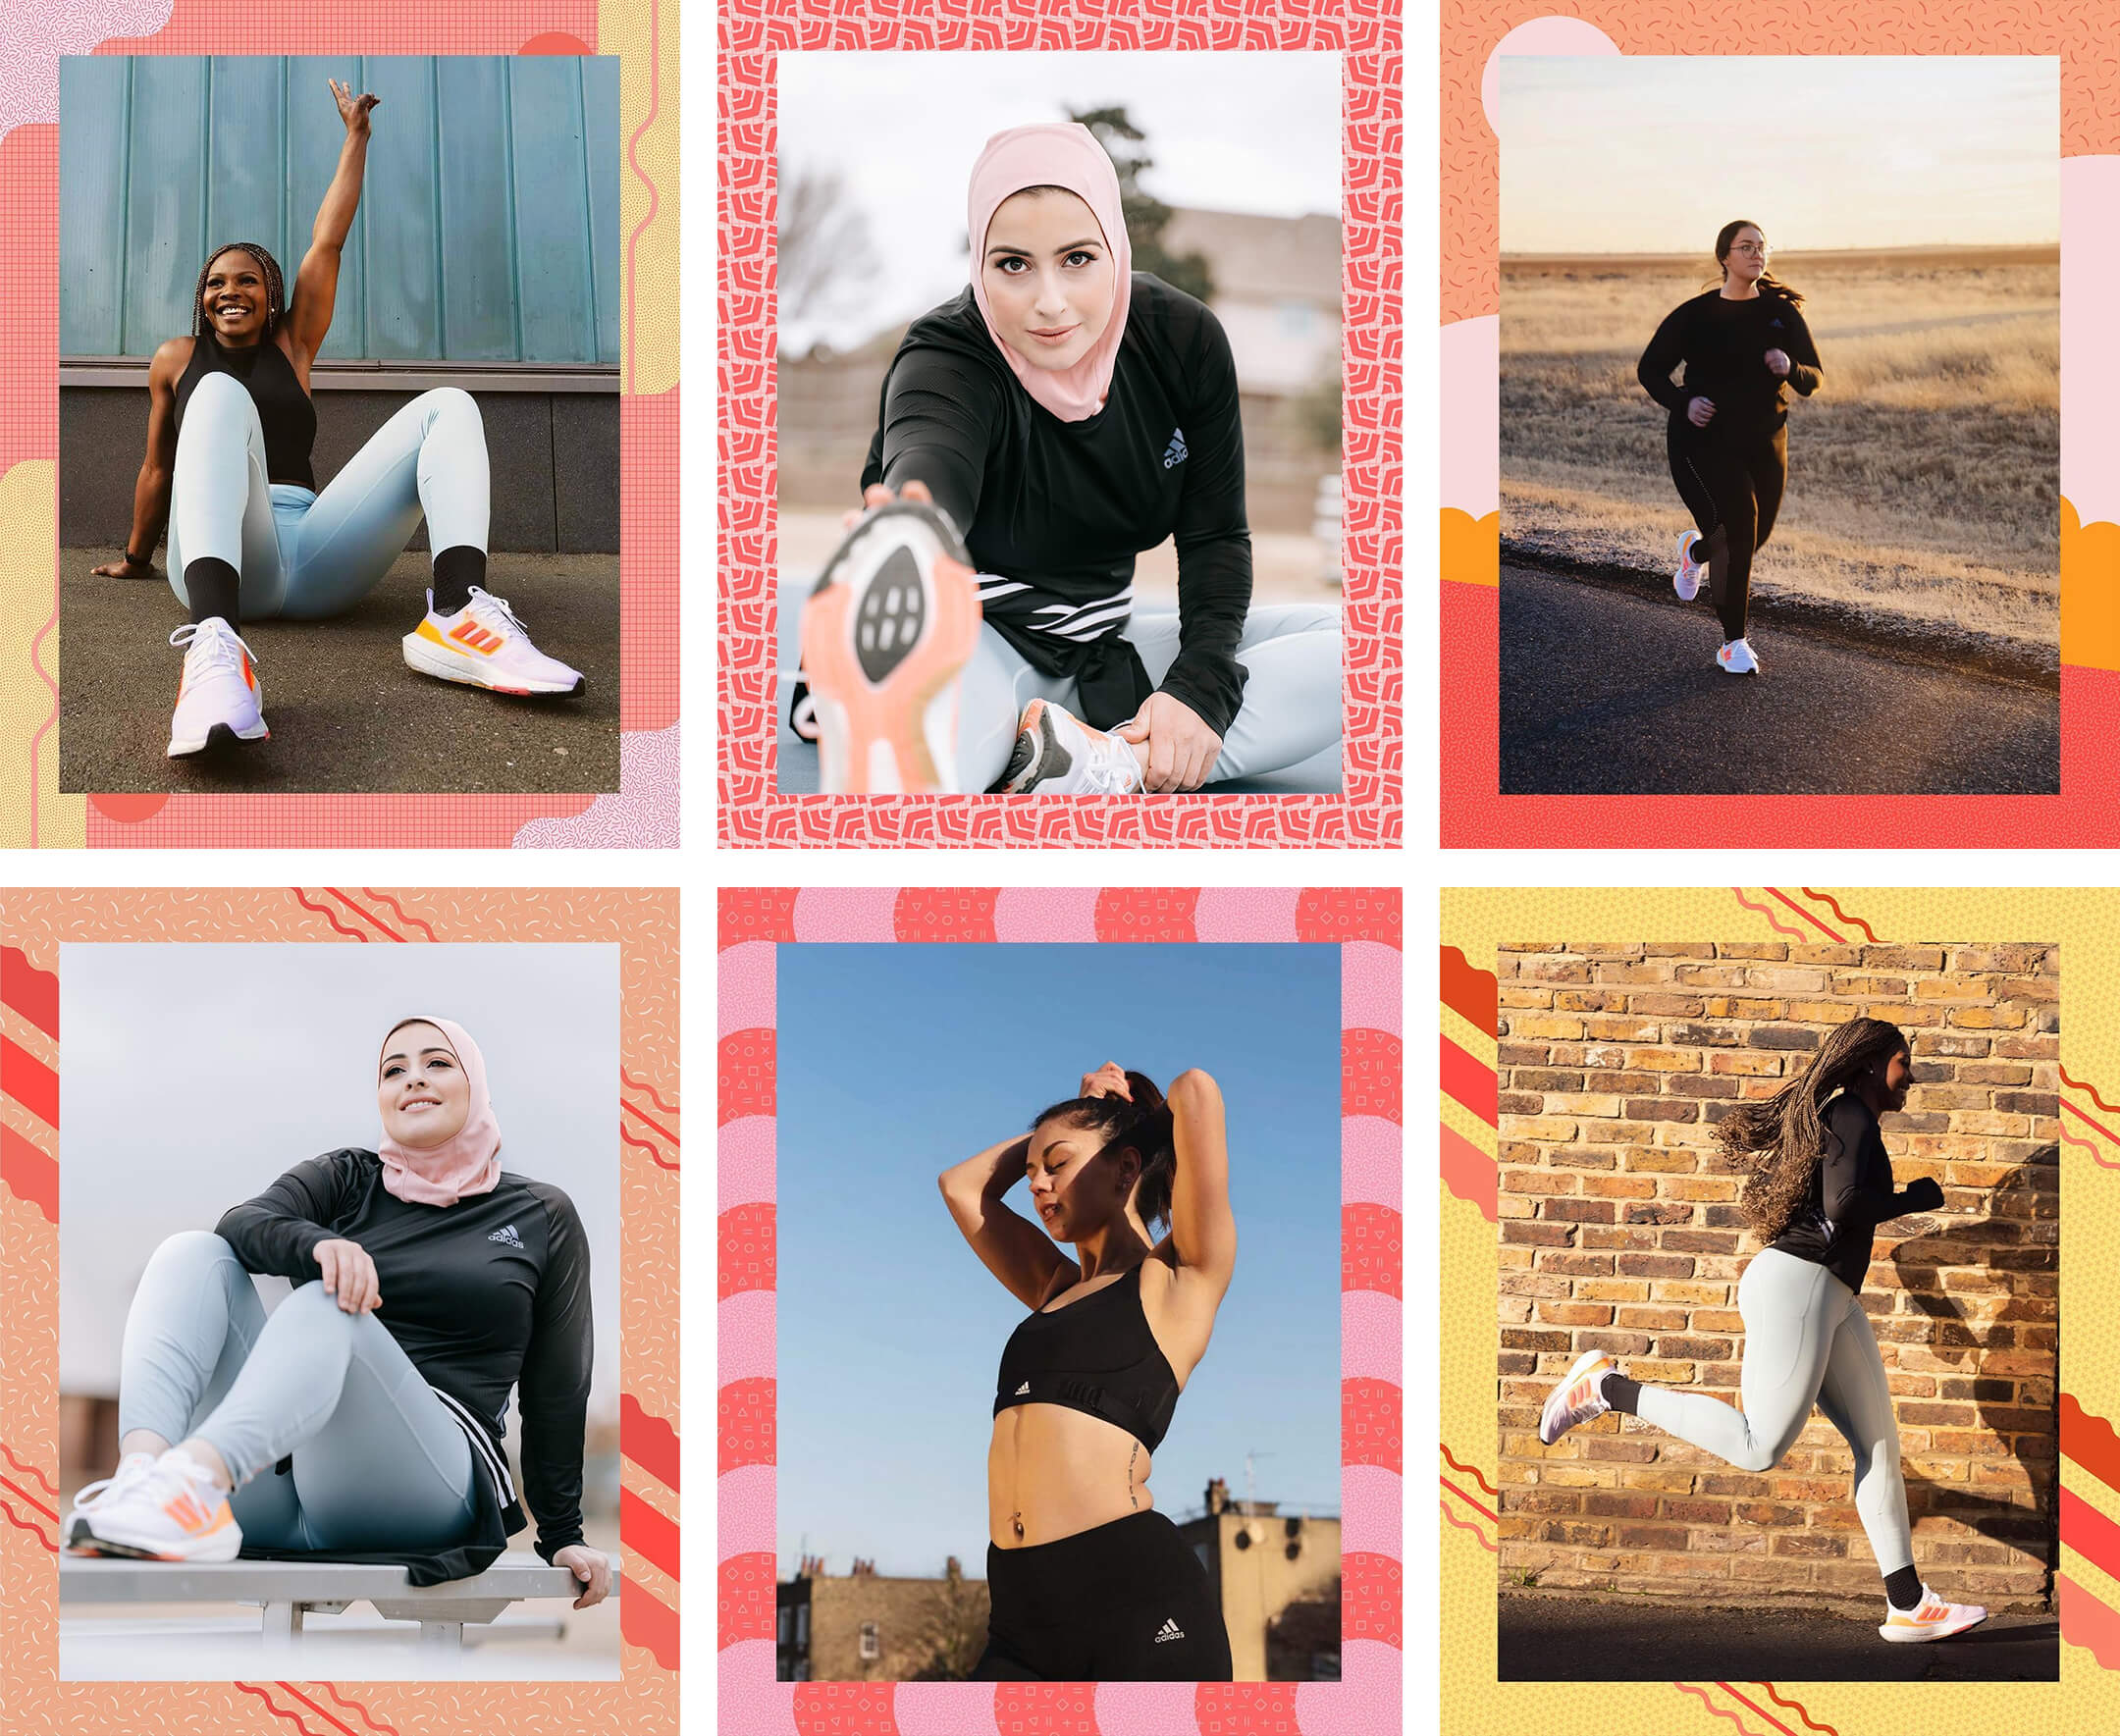 Adidas Ultraboost 22 female fit campaign on socials. Assets for influencers.